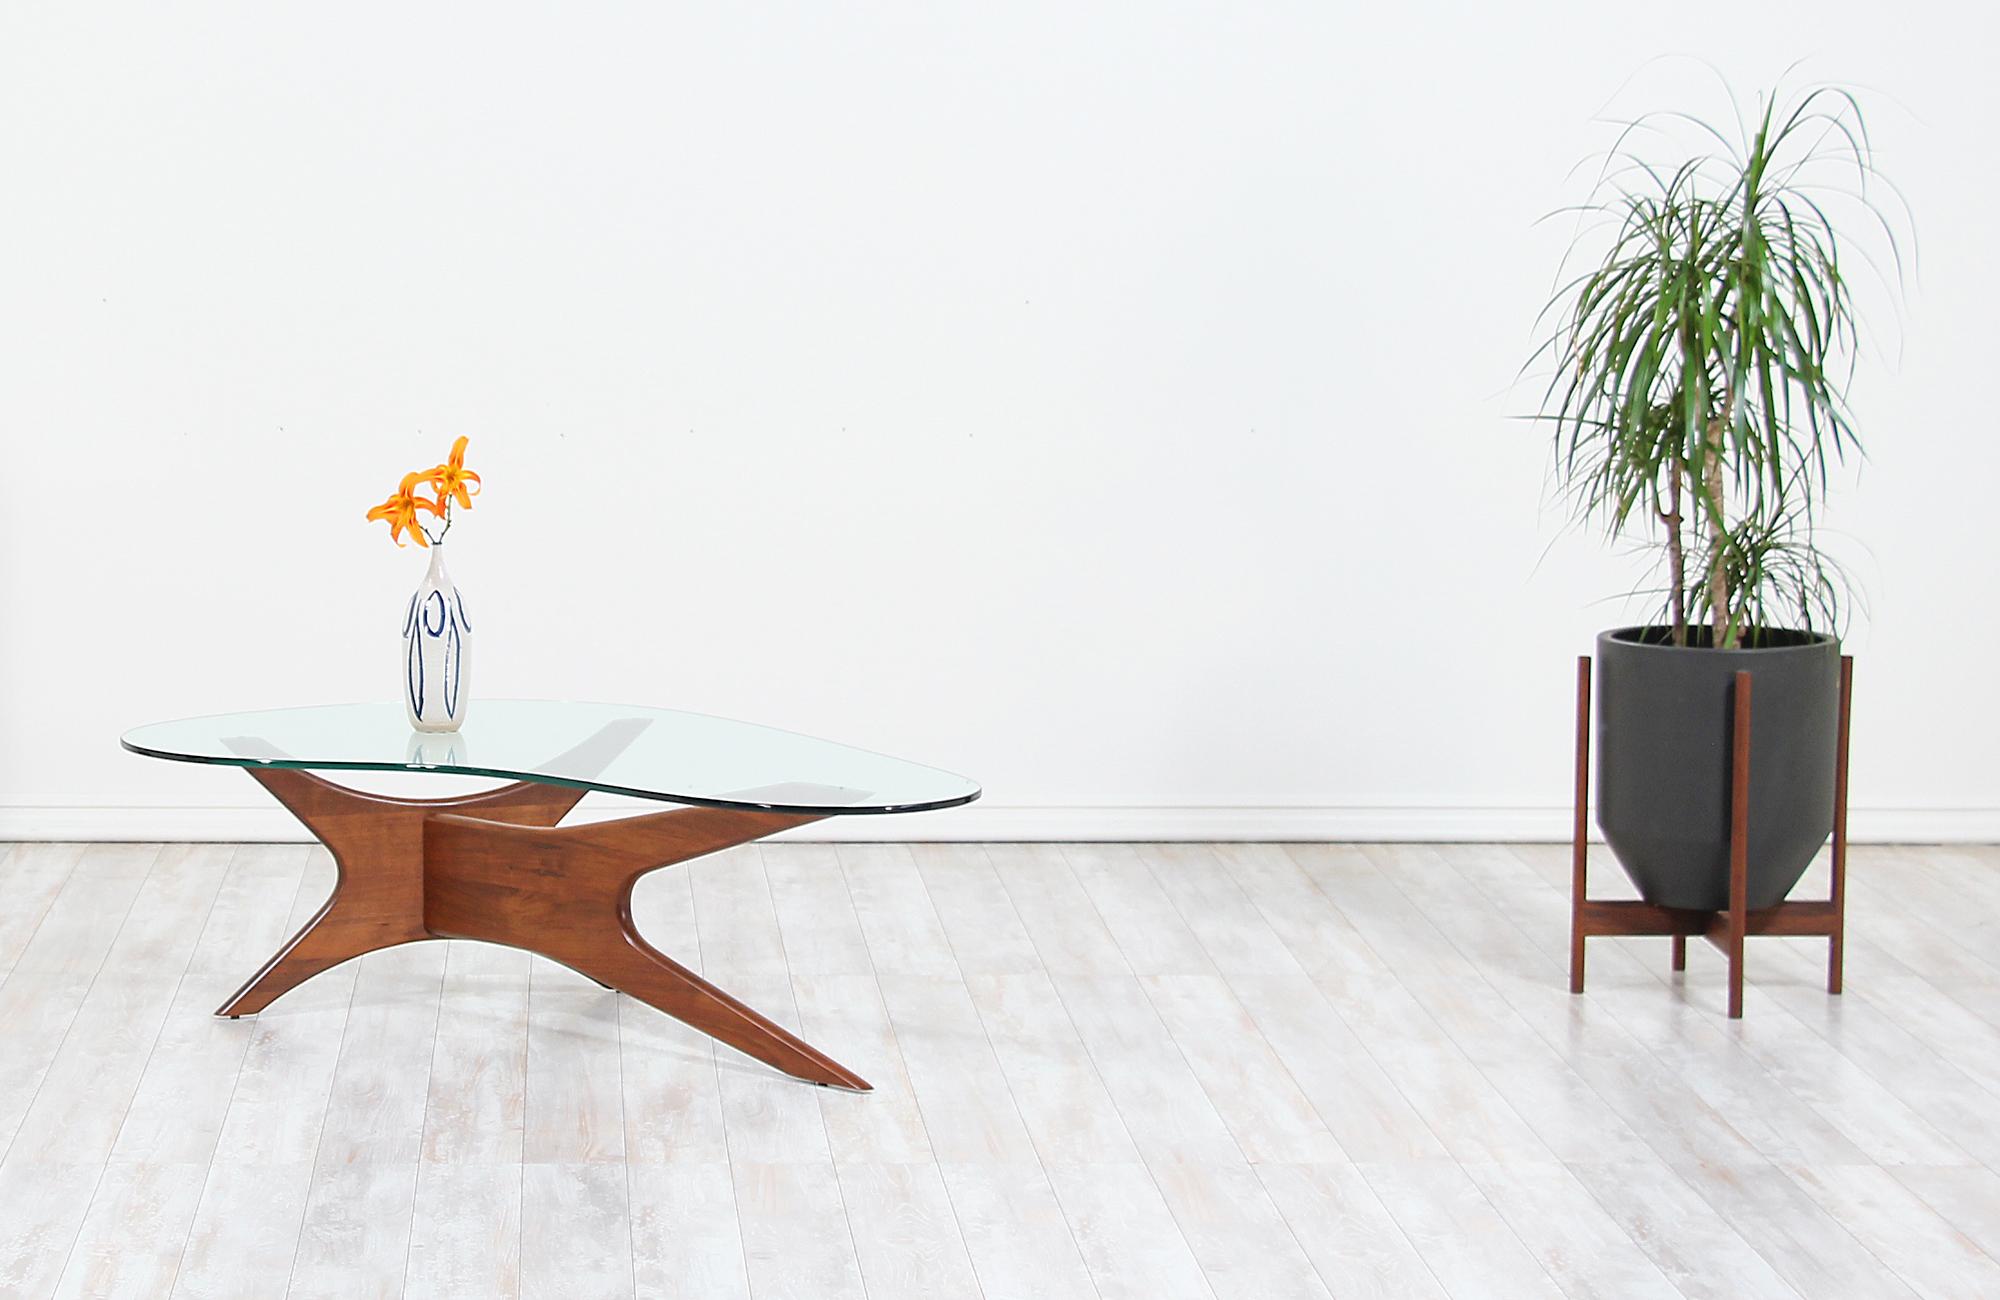 Mid-Century Modern coffee table Model 1465-T designed by Adrian Pearsall for Craft Associates in the United States circa 1960s. Like many of Pearsall’s designs, this exceptionally crafted coffee table incorporates the fun and sophisticated shapes